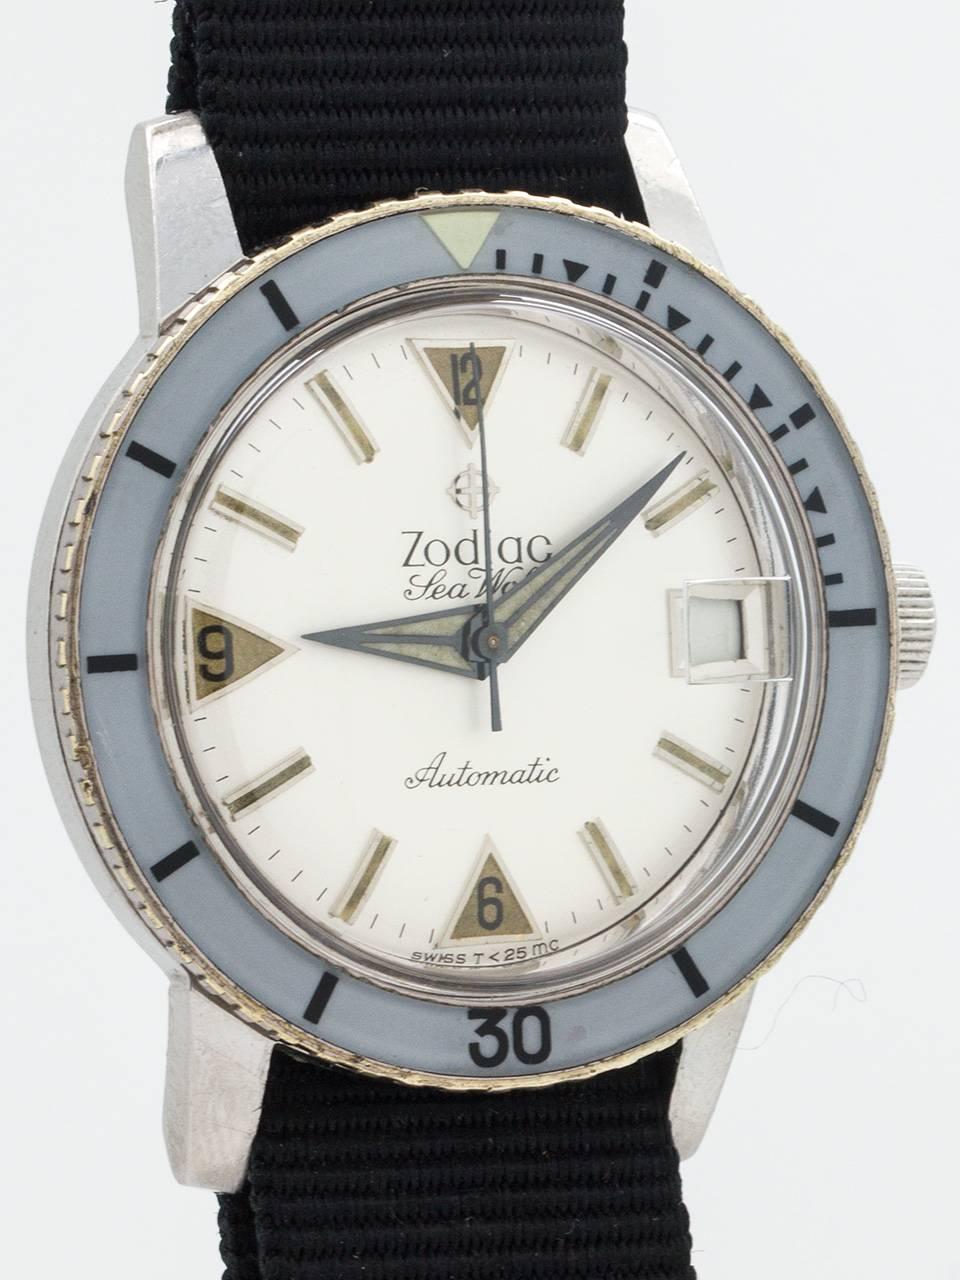 
Vintage 1960’s Zodiac Seawolf, popular diver’s model often associated with the Vietnam War and the U.S. Navy Seals. This is a very nice condition example, featuring a 35mm diameter case, gray bakelite elapsed time bezel, and very nice condition